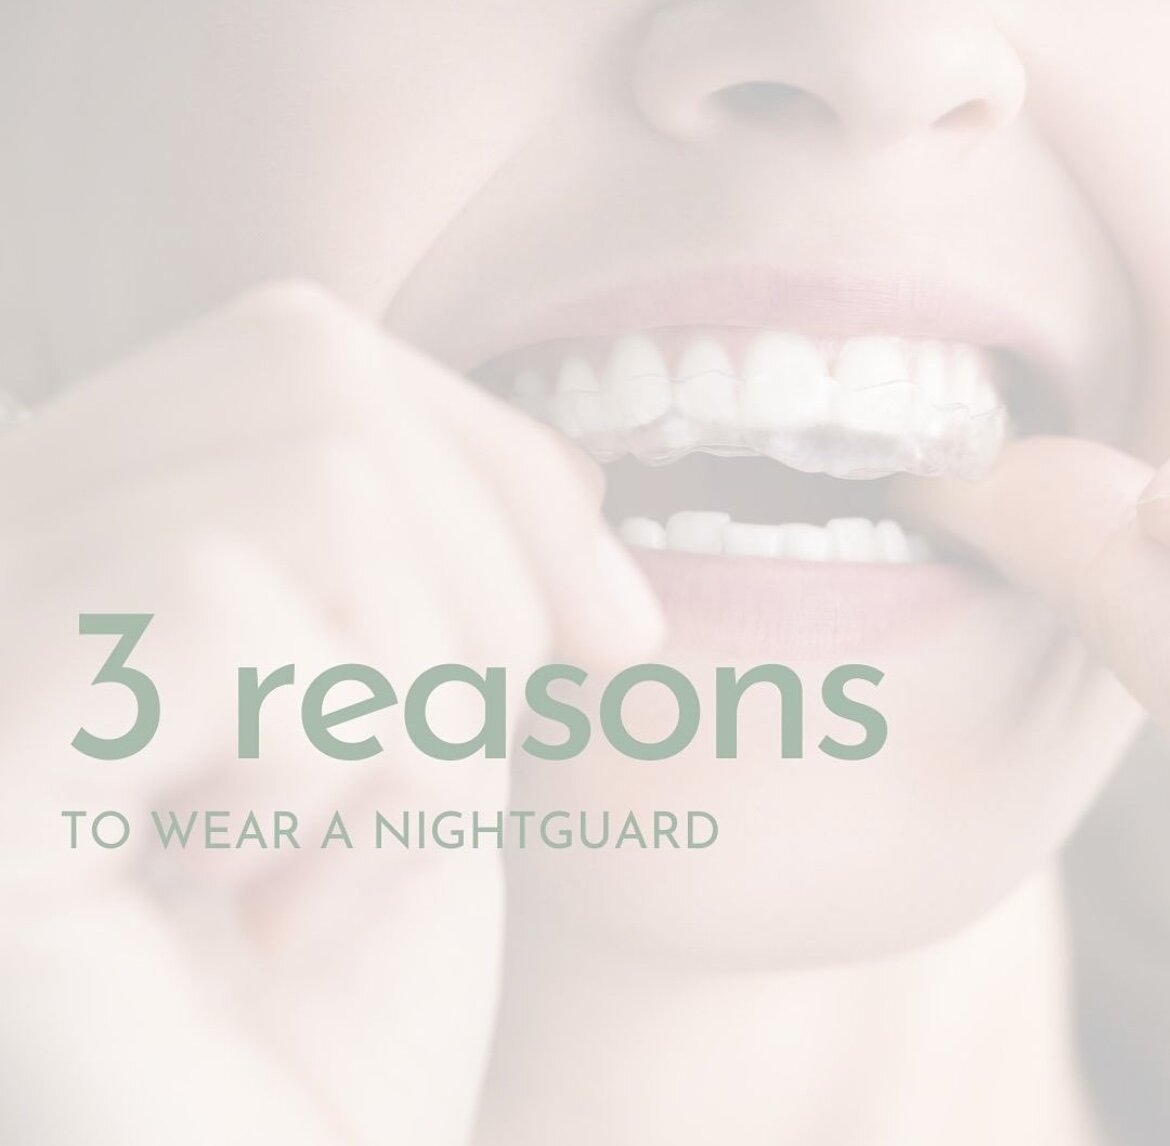 Let us know if you think you may be experiencing neck aches and headaches due to teeth grinding. 

We can advise you on whether a night guard is something you would benefit from.

Give us a call to schedule an appointment or let us know on your next 